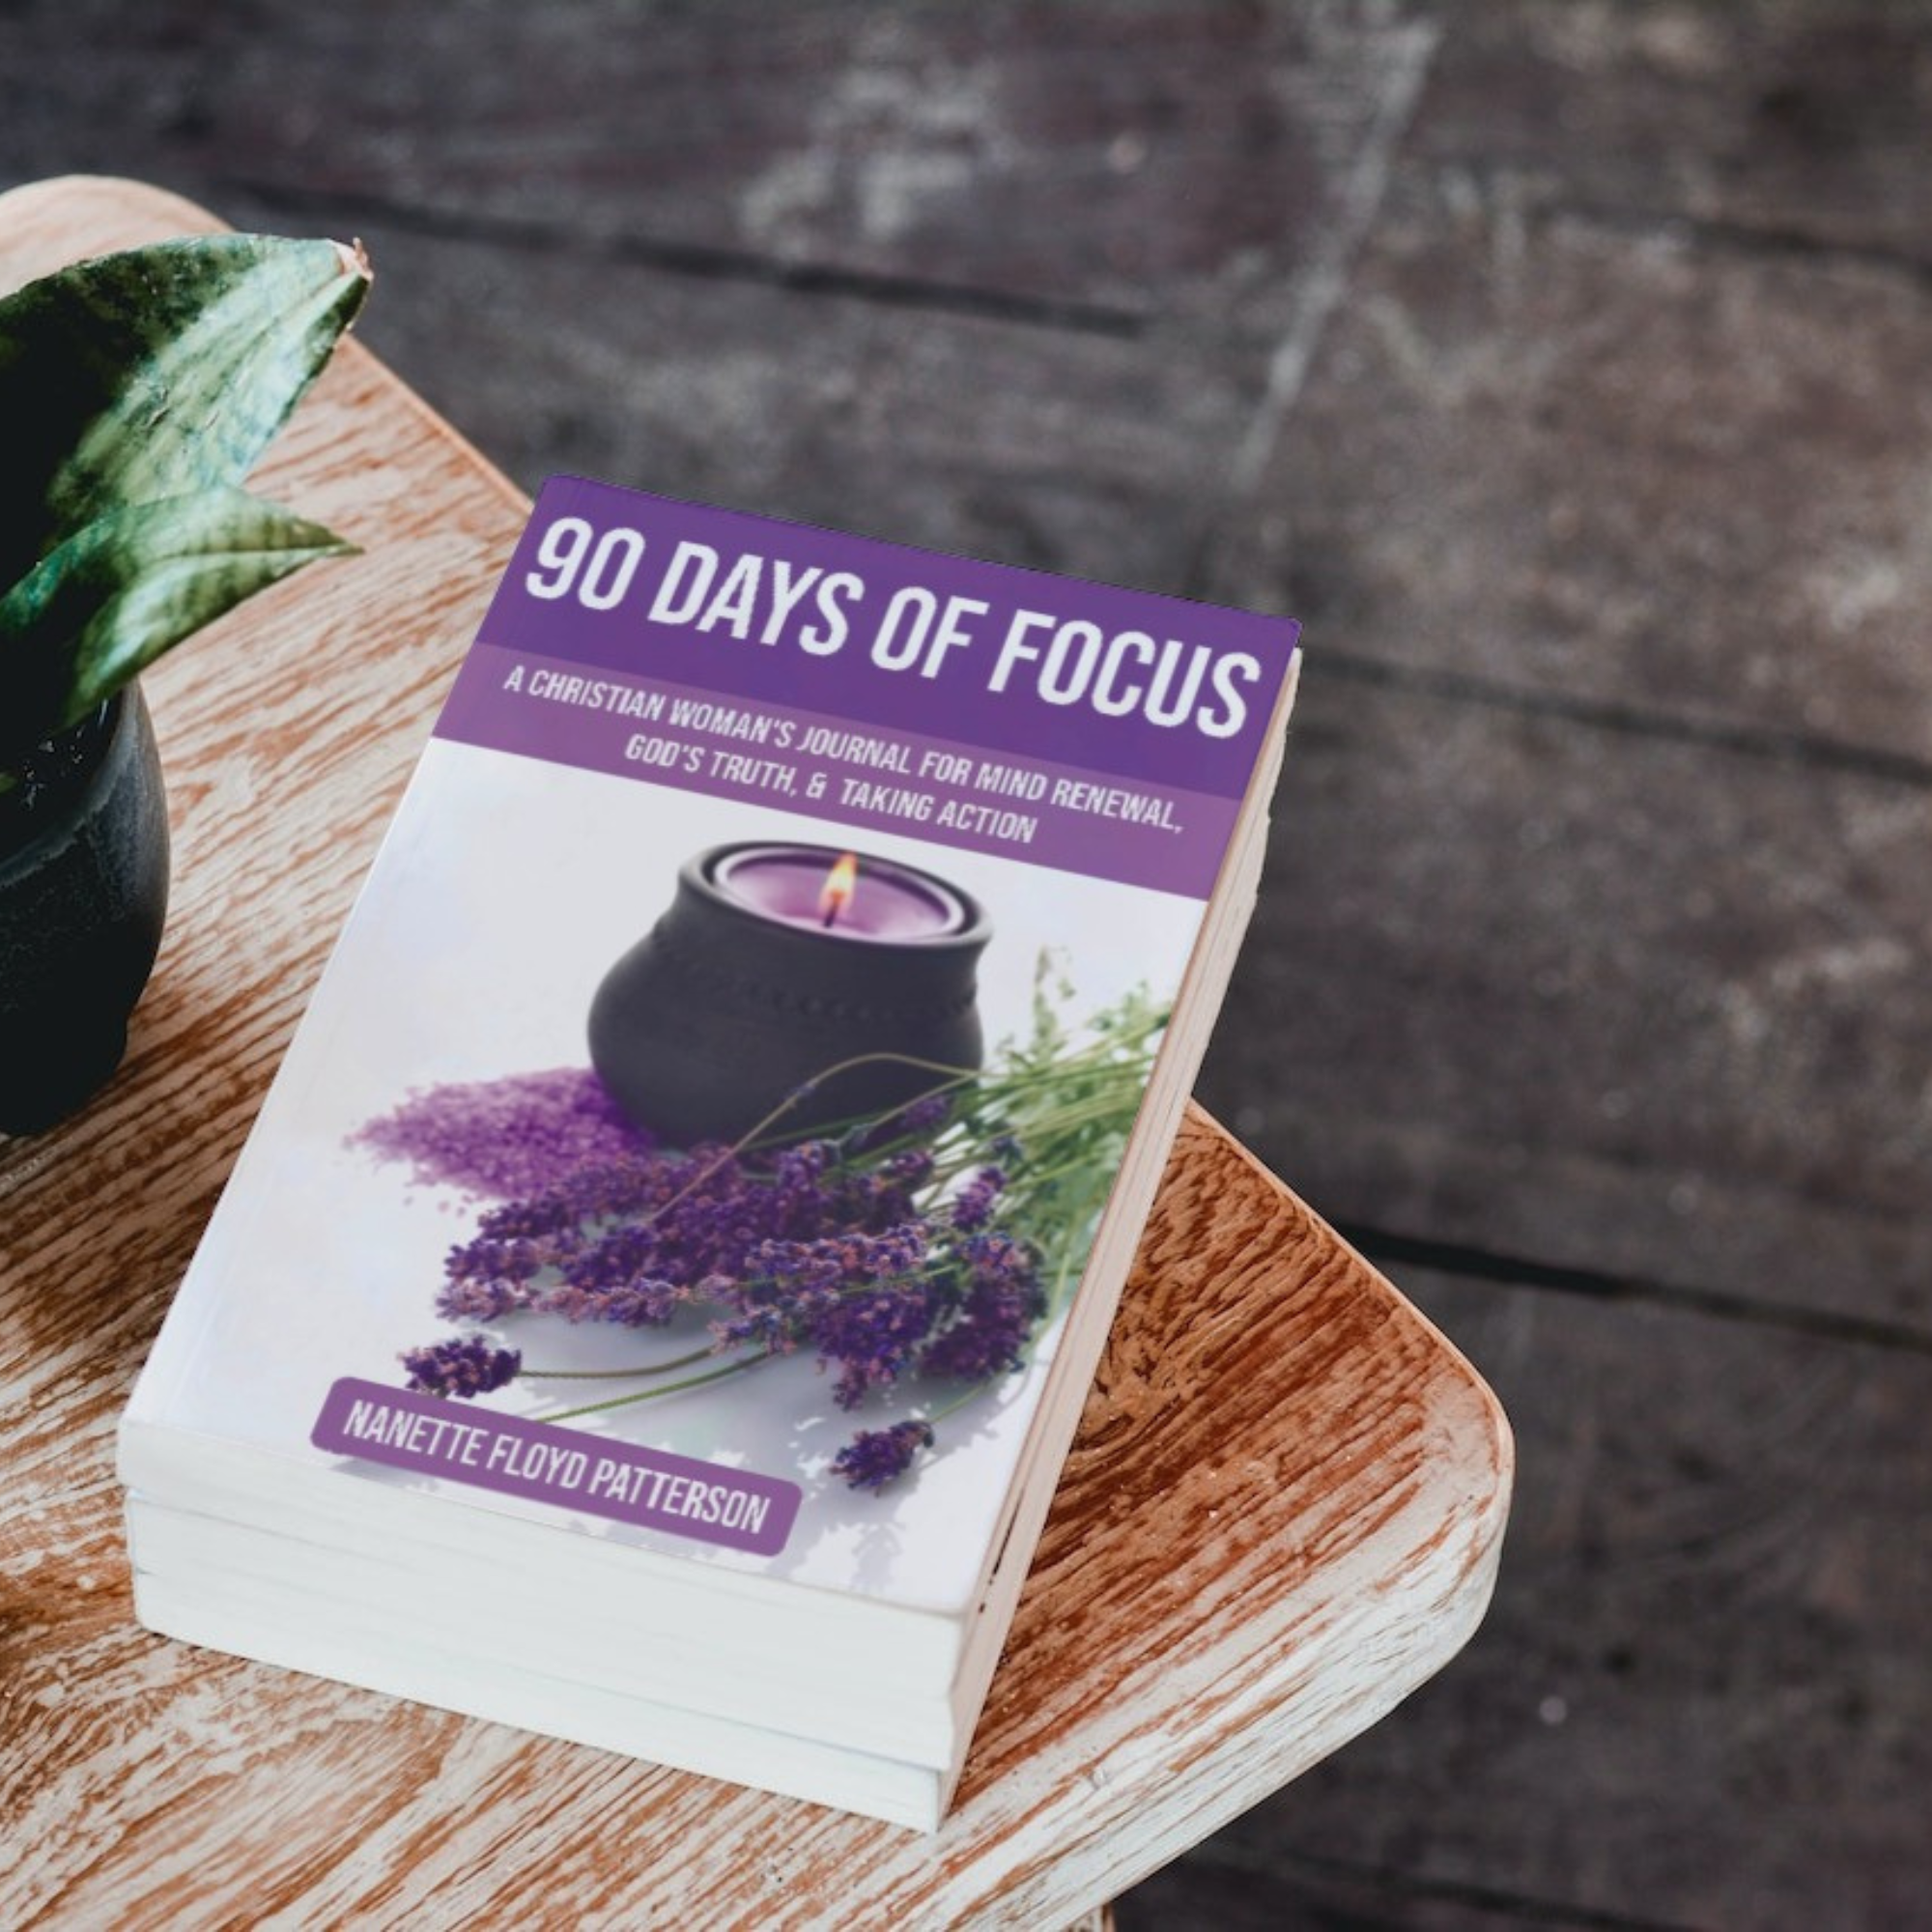 90 Days of Focus: A Christian Woman’s Journal for Mind Renewal, God’s Truth, and Taking action